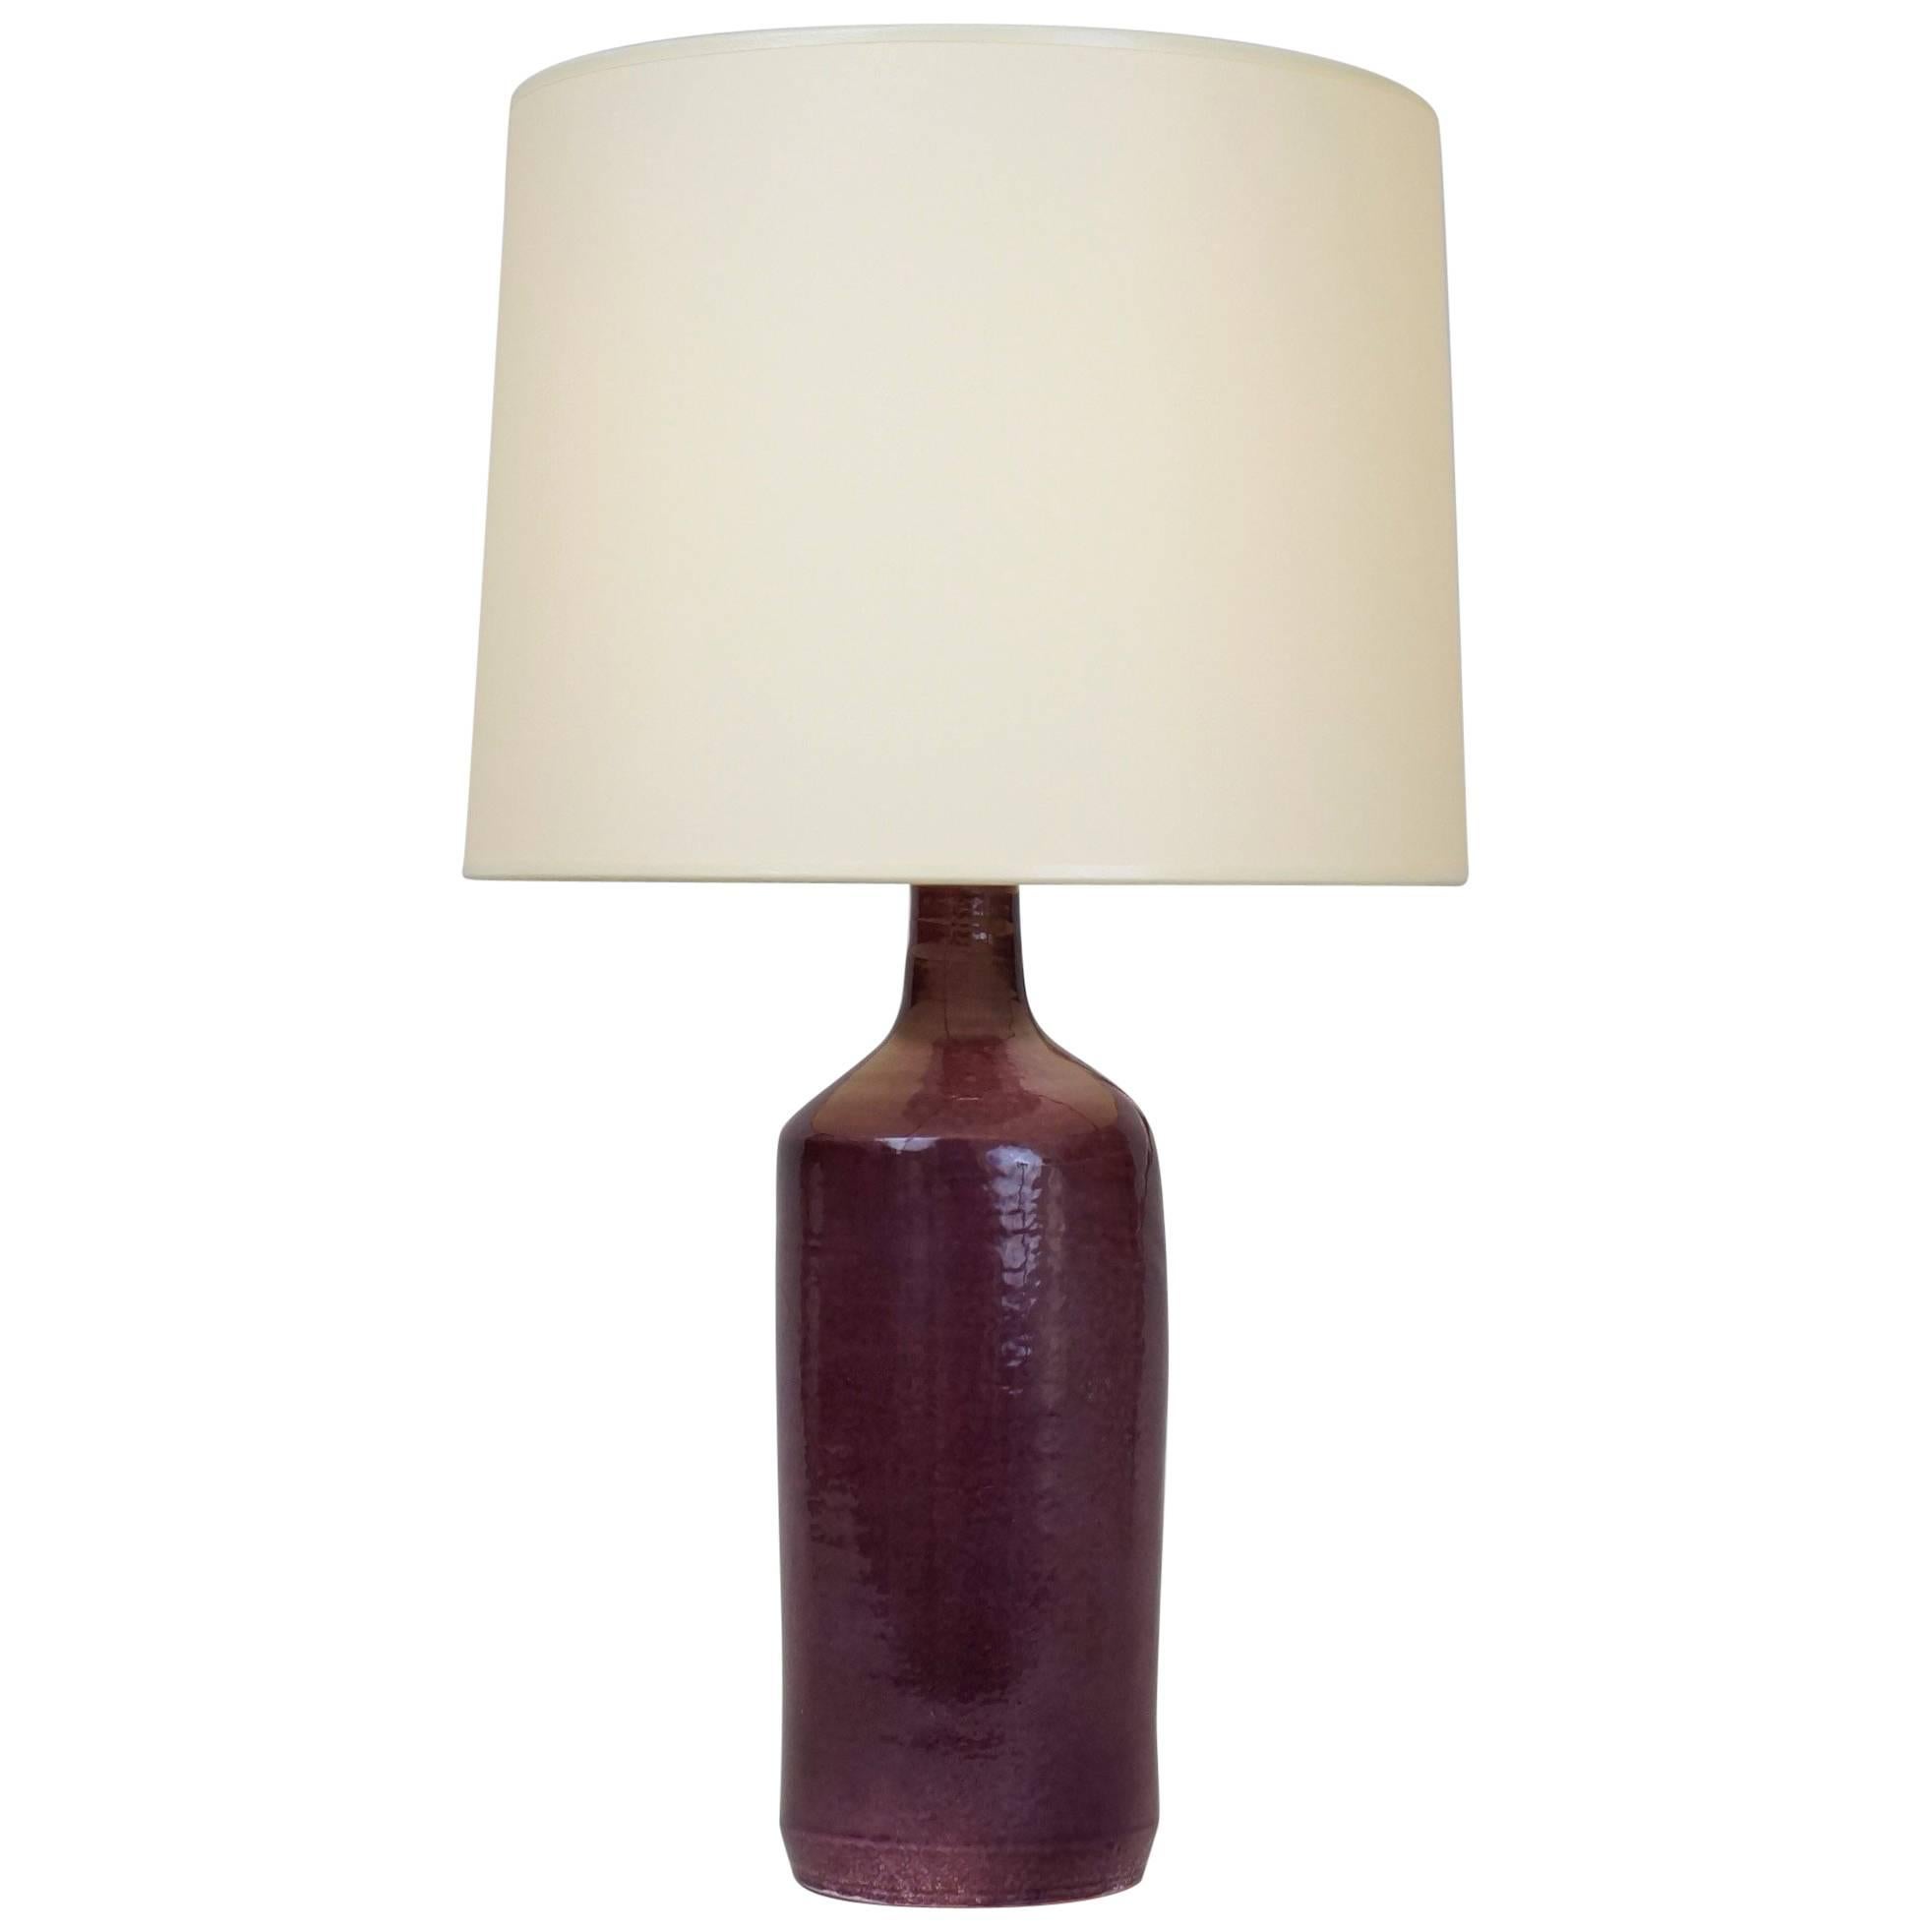 Late 20th Century Red-Purple Ceramic Table Lamp For Sale